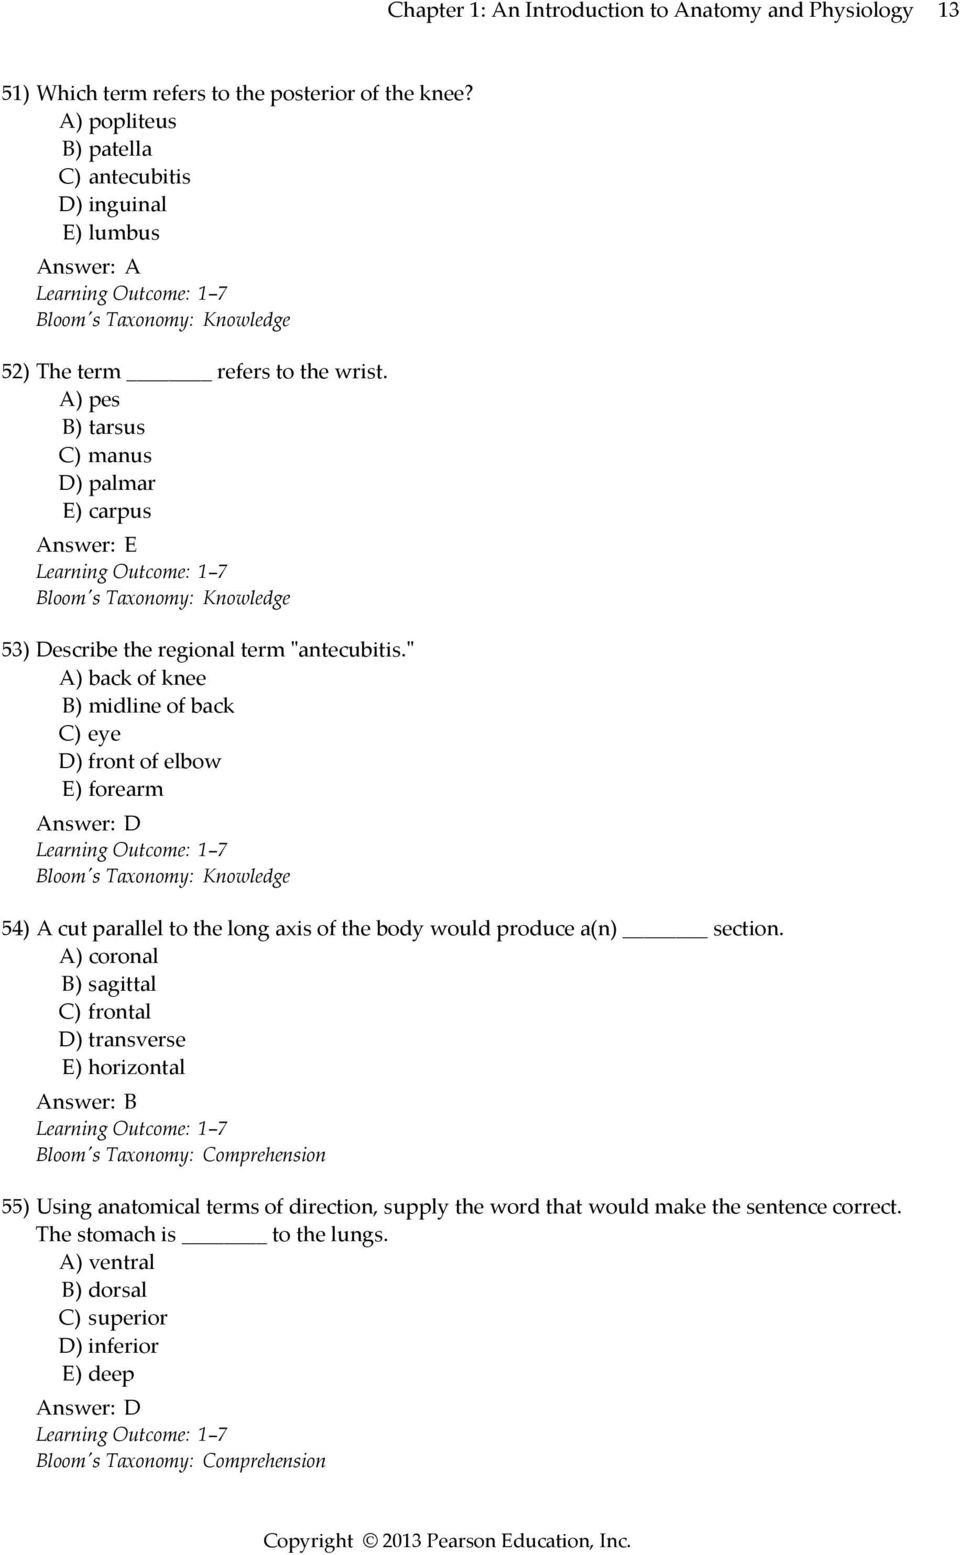 Anatomical Terms Worksheet Answers Prehending Anatomy and Physiology Terminology Worksheet